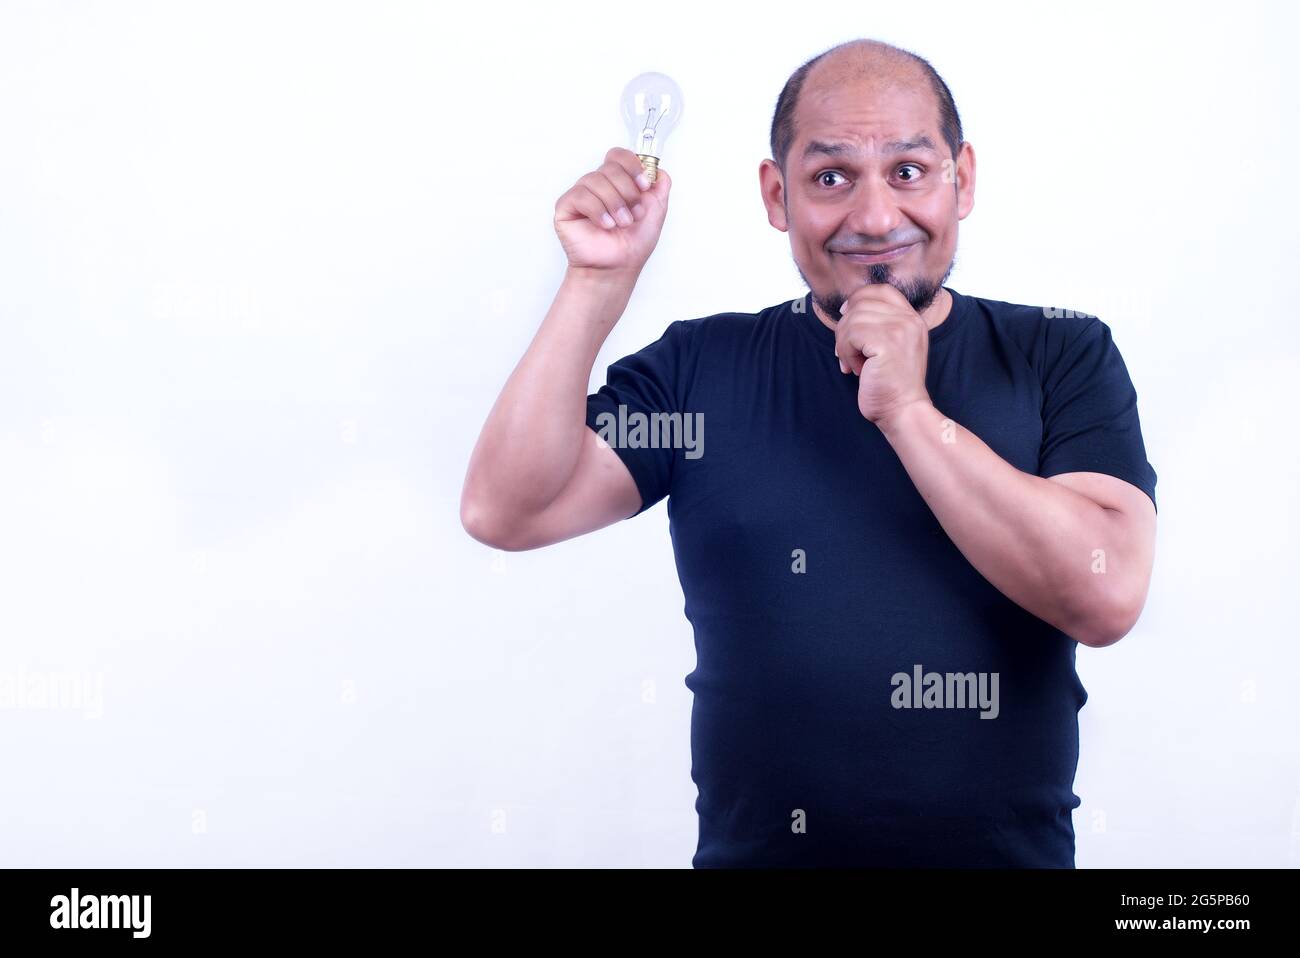 Man on a white background gesturing. Stock Photo